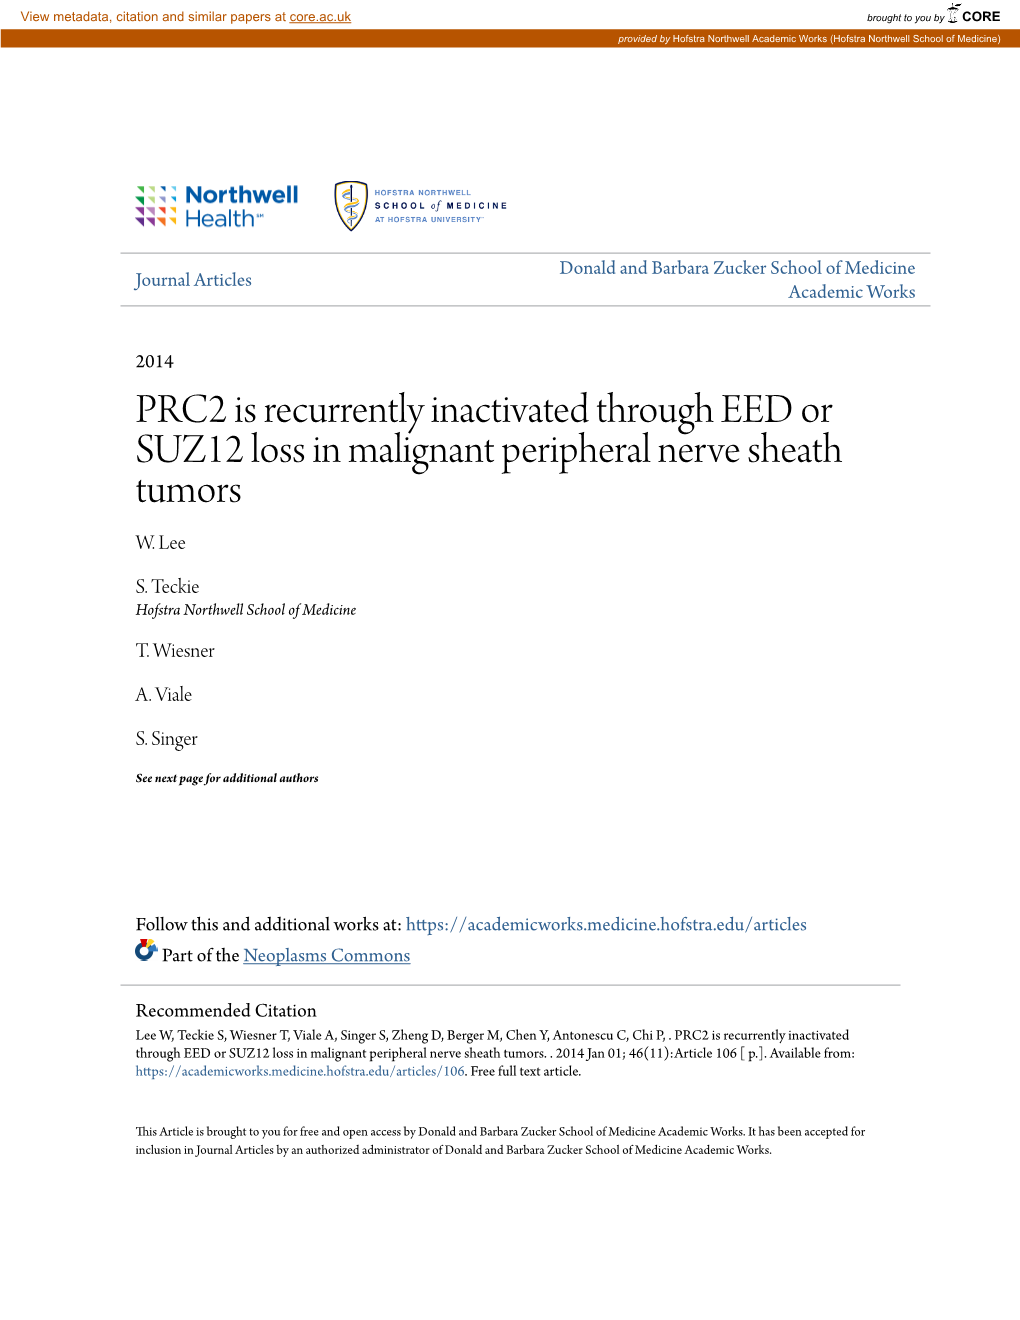 PRC2 Is Recurrently Inactivated Through EED Or SUZ12 Loss in Malignant Peripheral Nerve Sheath Tumors W